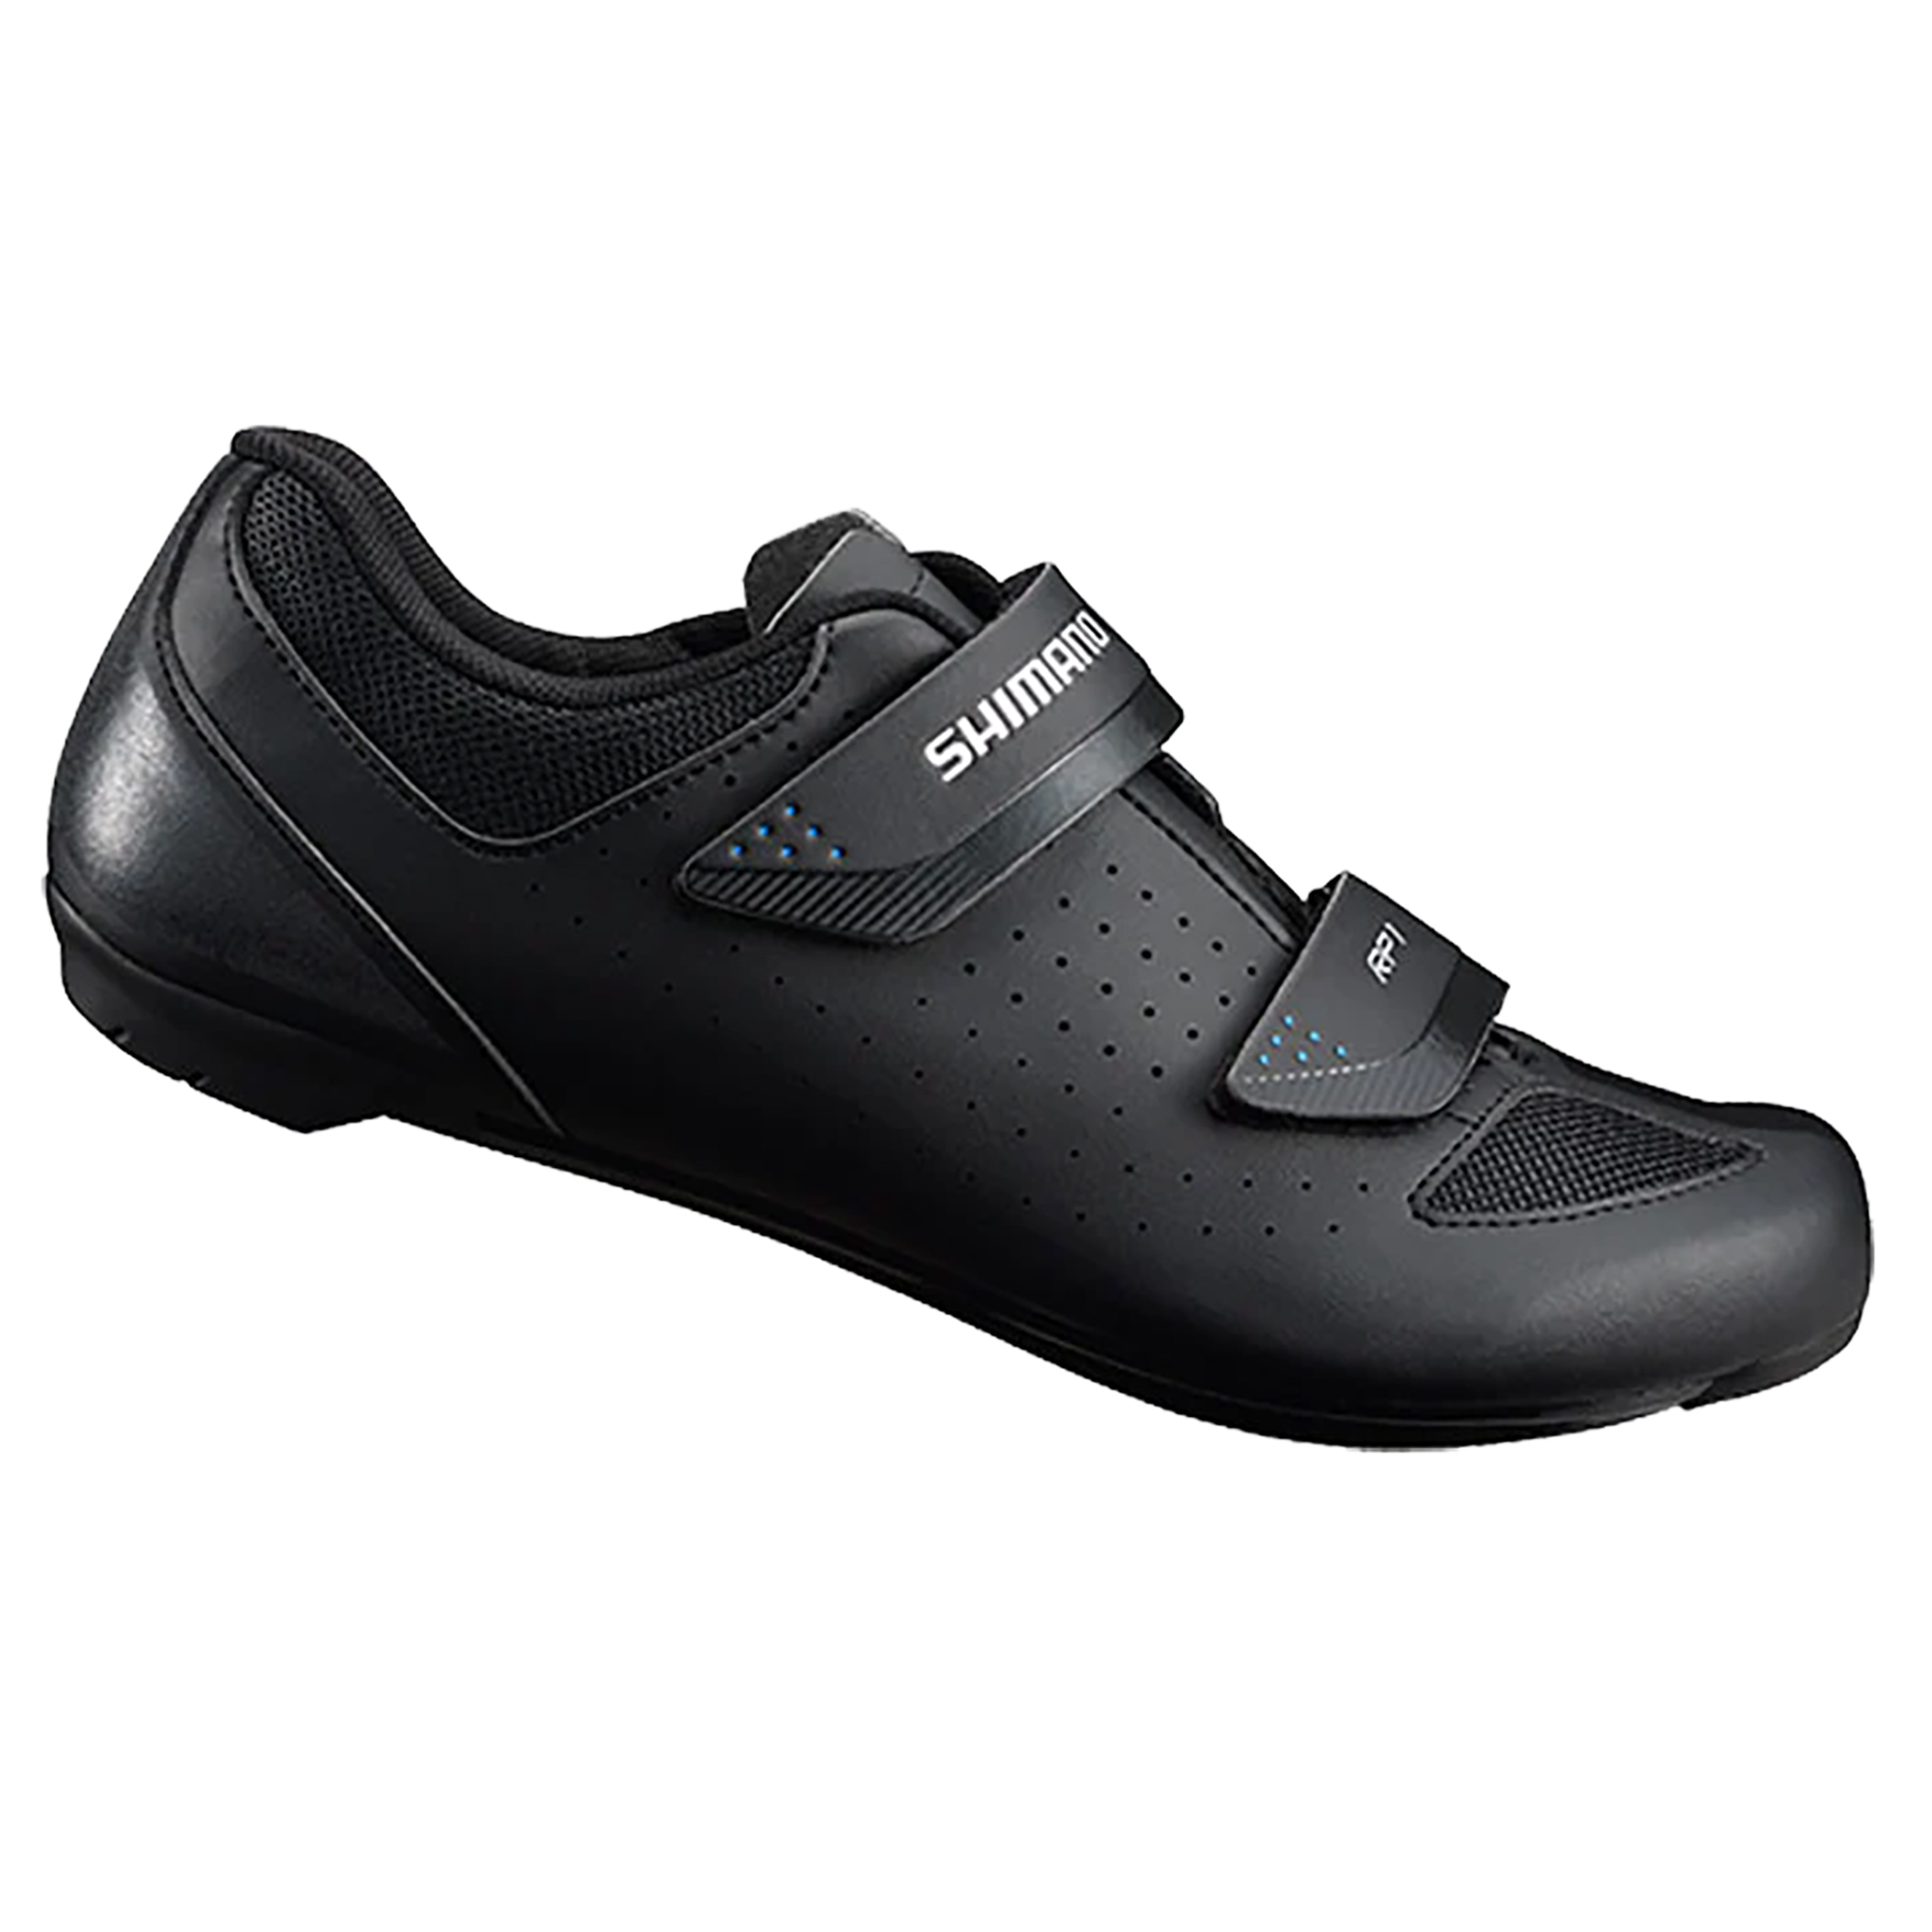 Shimano RP1 Road Bicycle Shoes For SPD SL Black Size 39